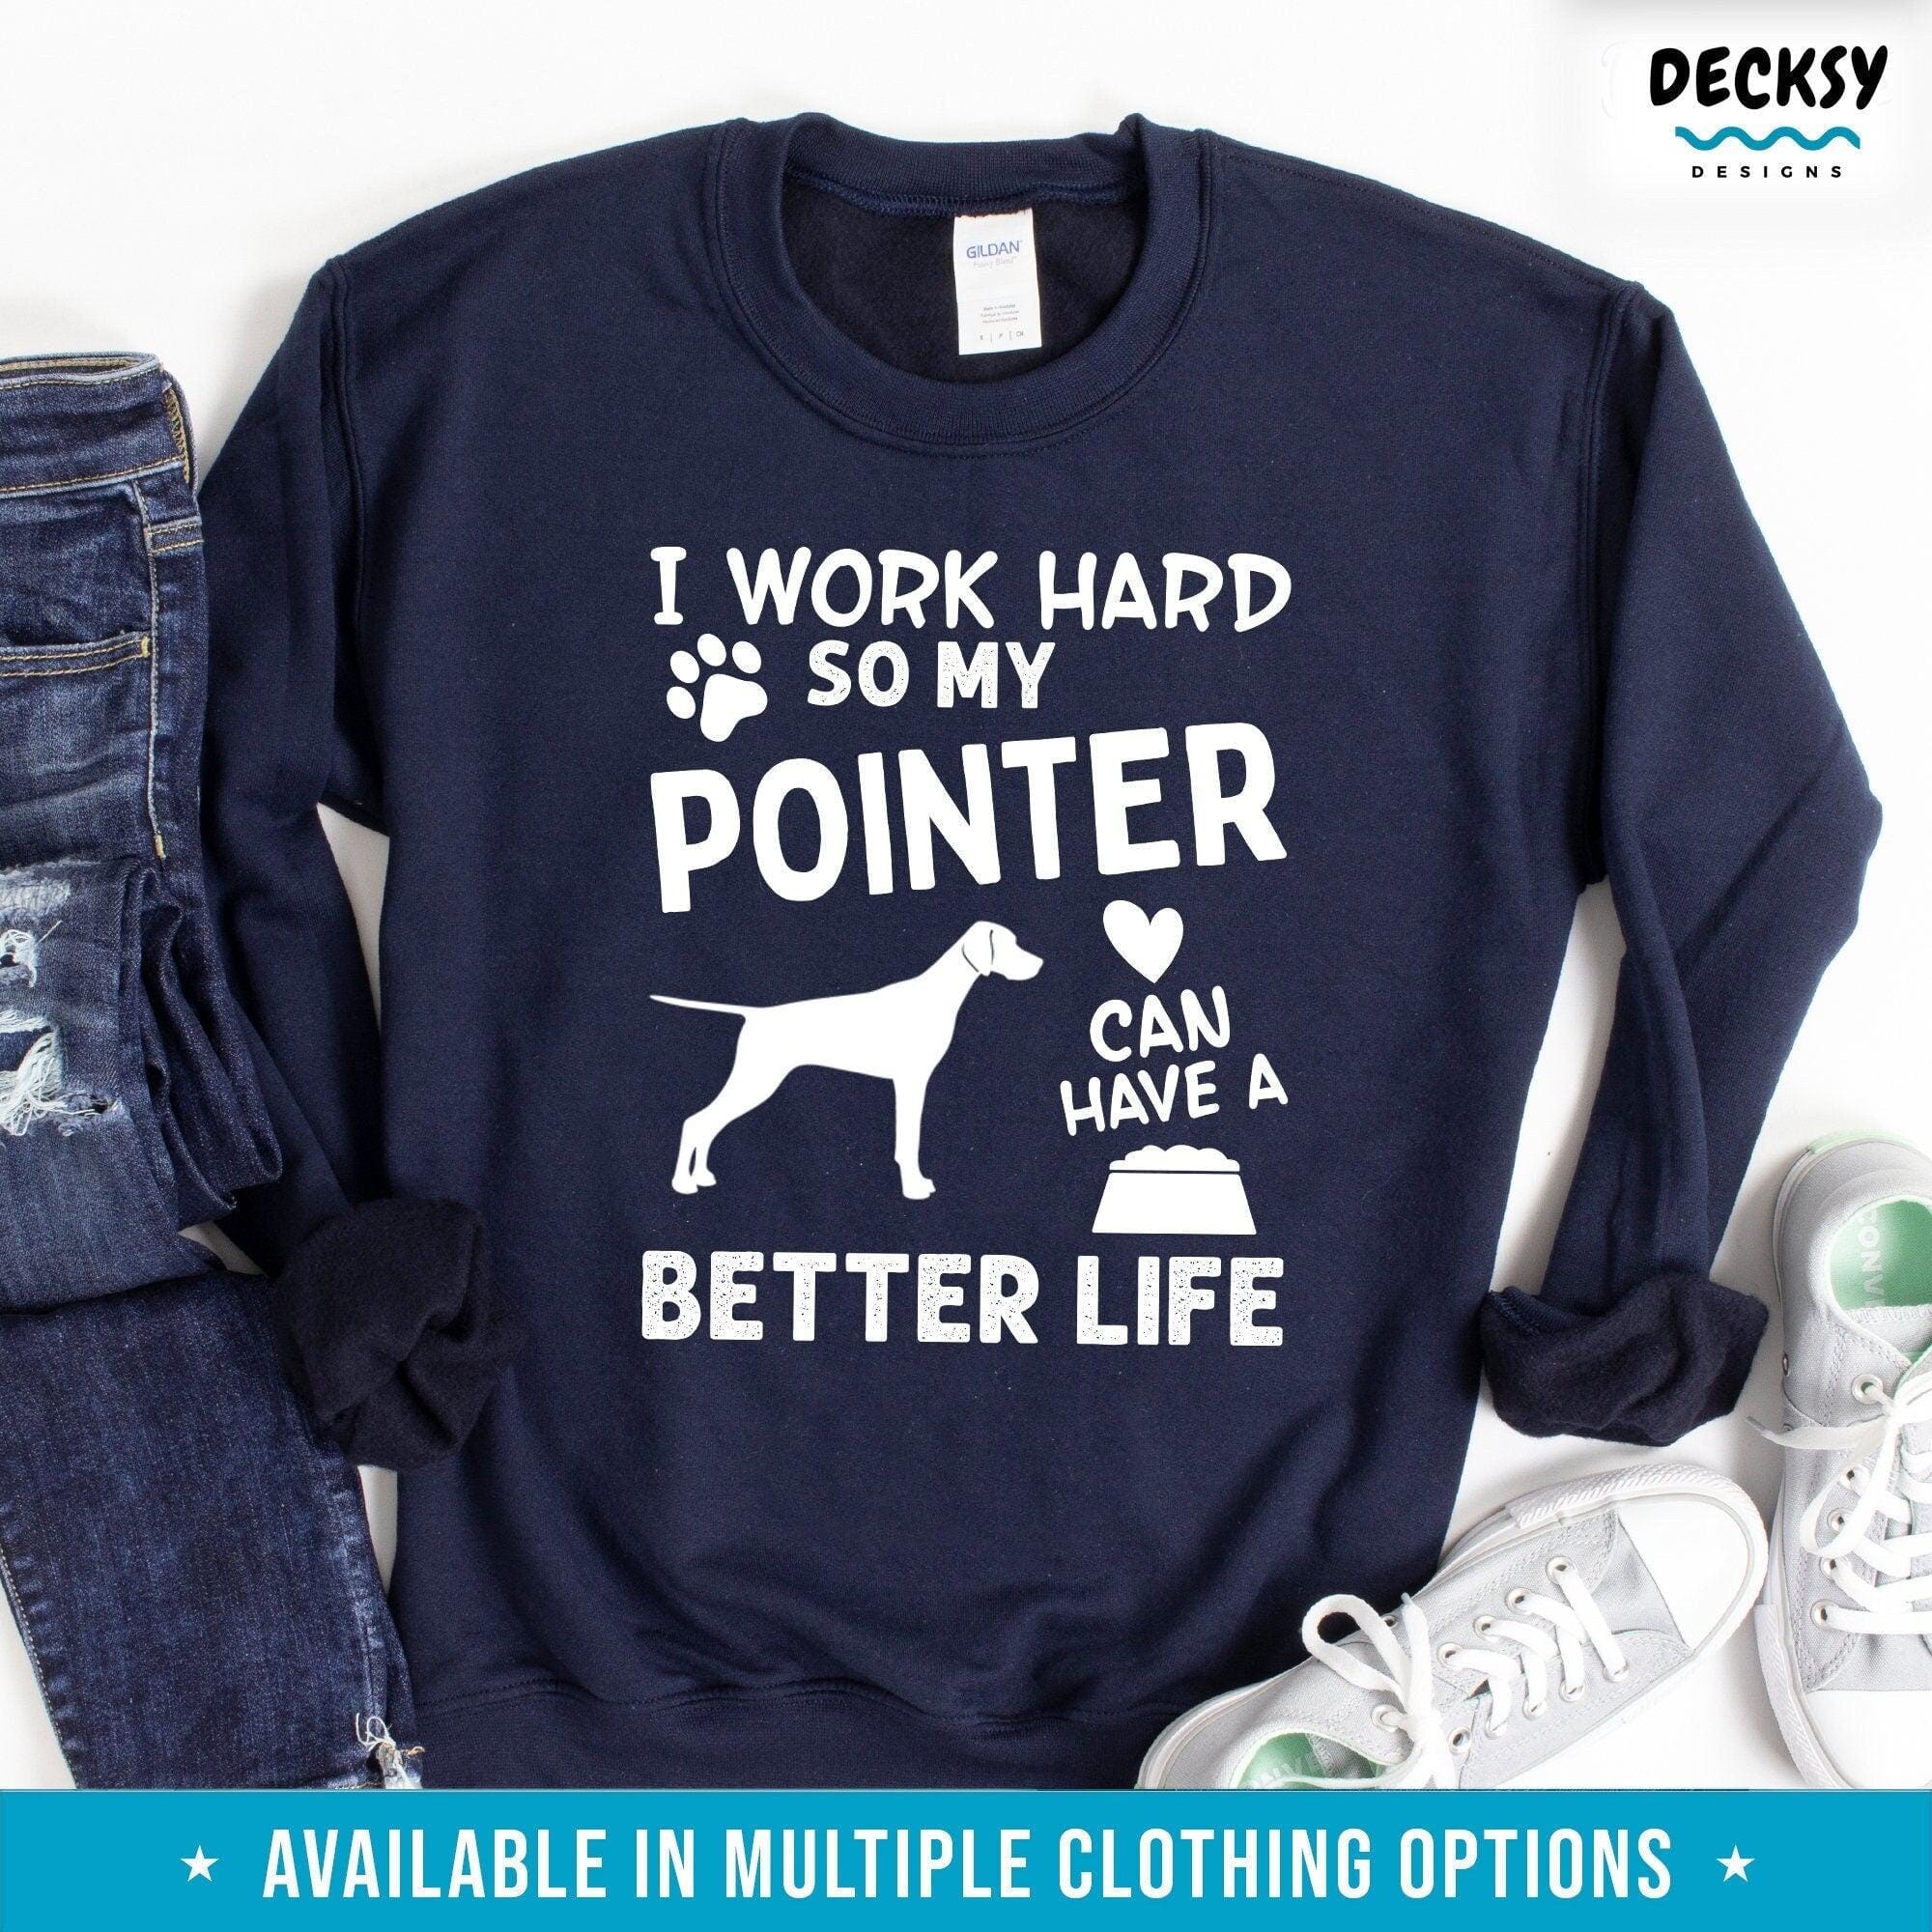 Pointer Sweatshirt, German Pointer Dog Gift-Clothing:Gender-Neutral Adult Clothing:Tops & Tees:T-shirts:Graphic Tees-DecksyDesigns